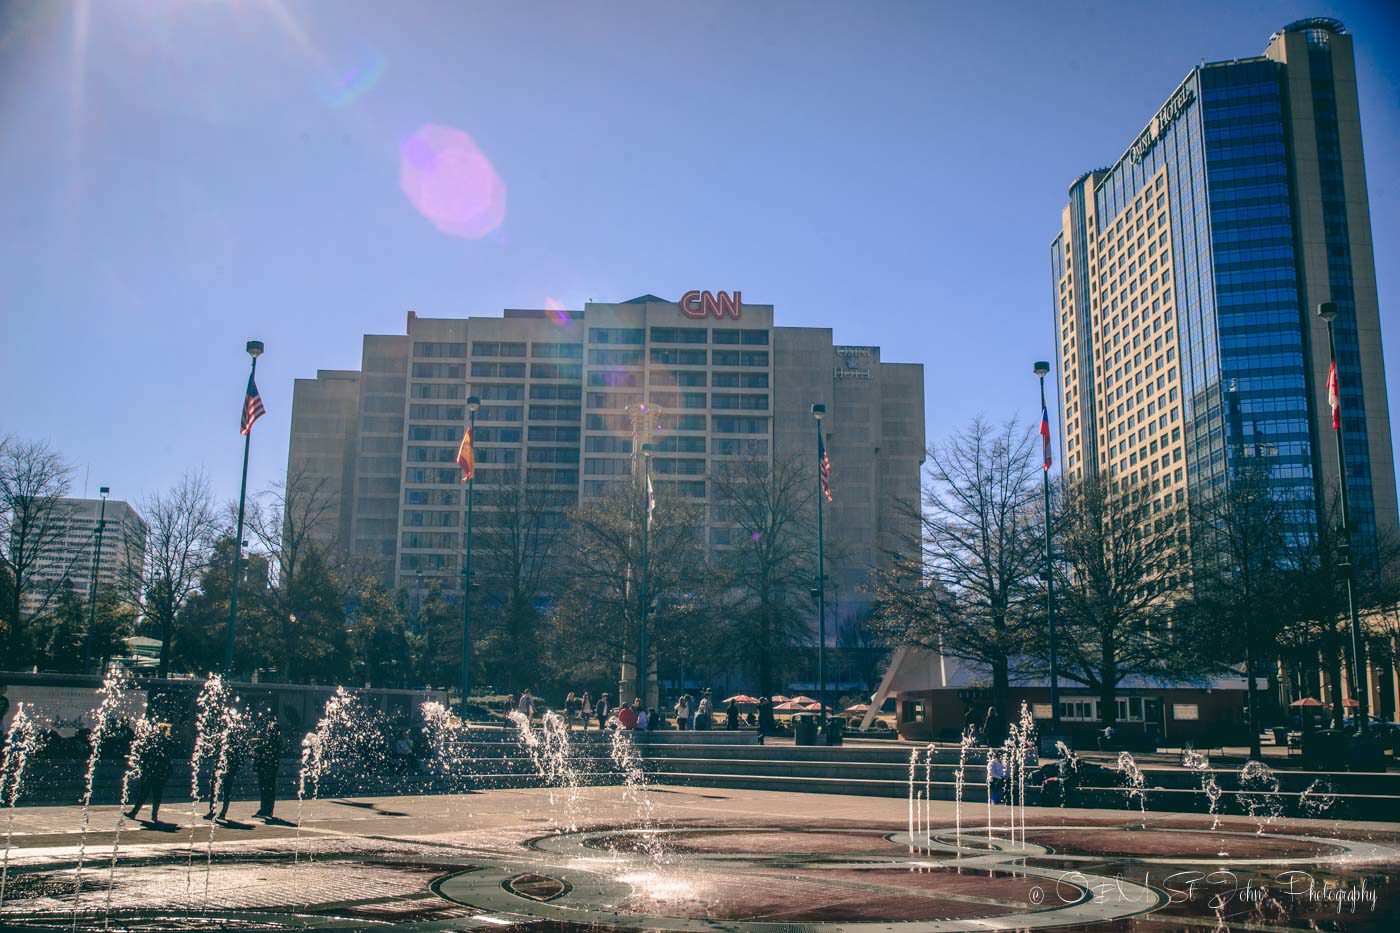 Centennial Olympic Park with CNN building in the background. Atlanta. USA